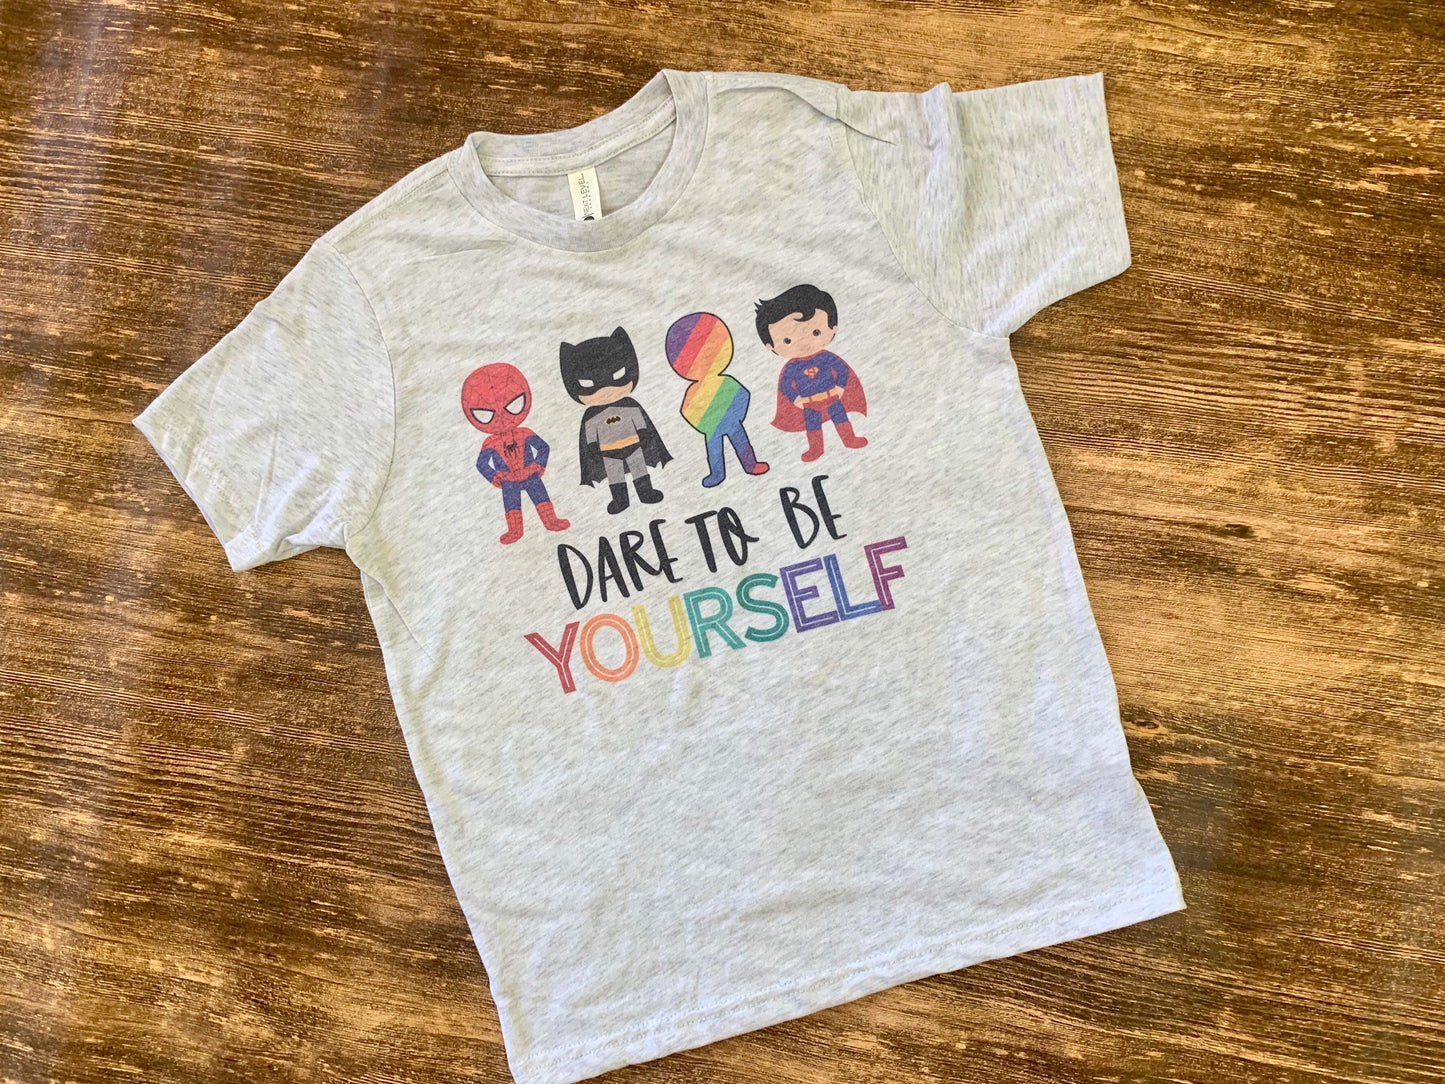 Dare To Be Yourself Tee